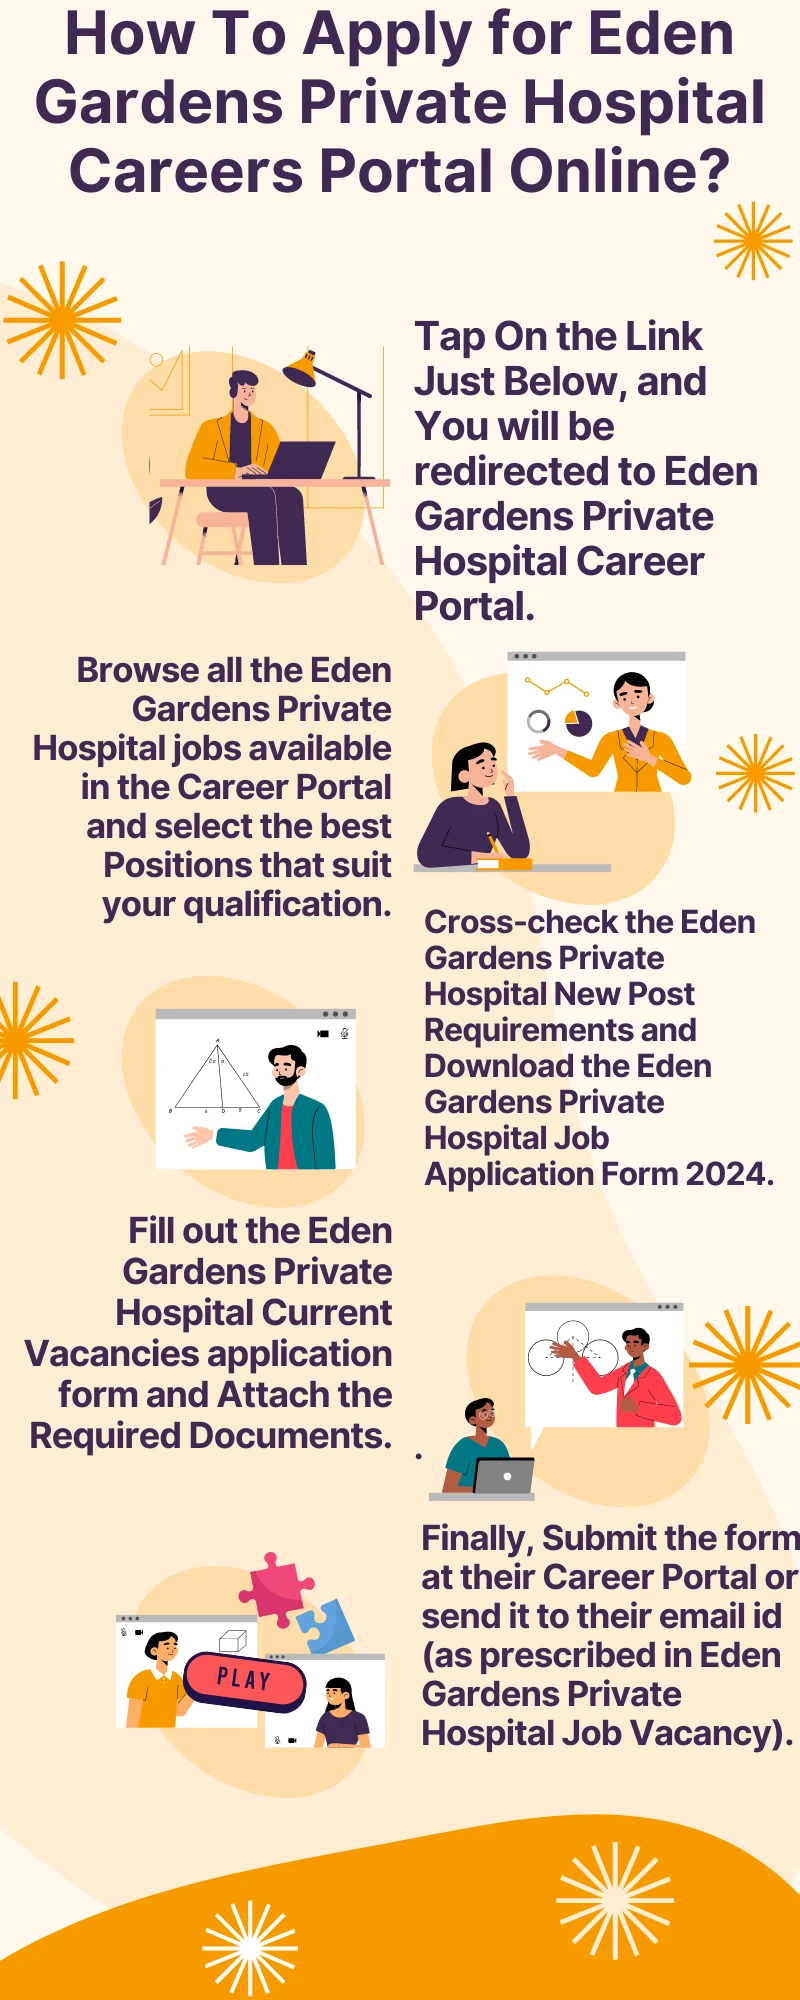 How To Apply for Eden Gardens Private Hospital Careers Portal Online?